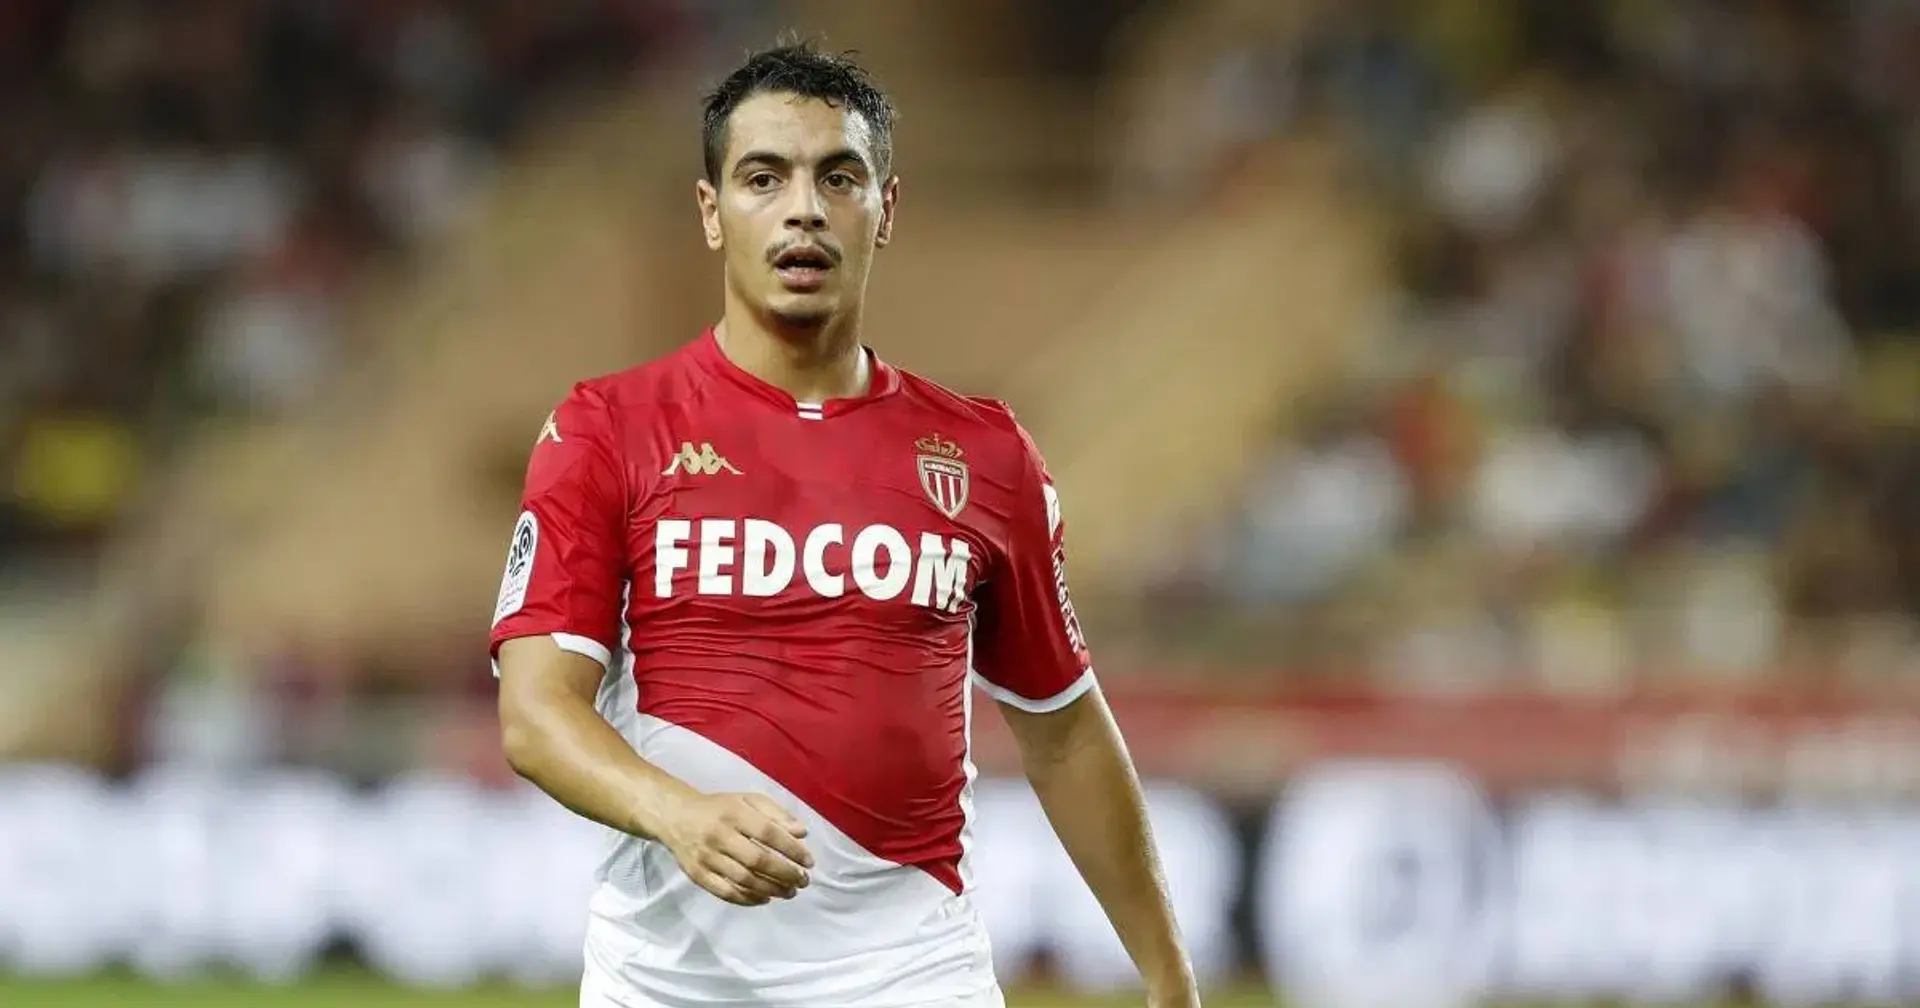 Ligue 1 leading scorer Wissam Ben Yedder could have reportedly ended up at Barcelona this January